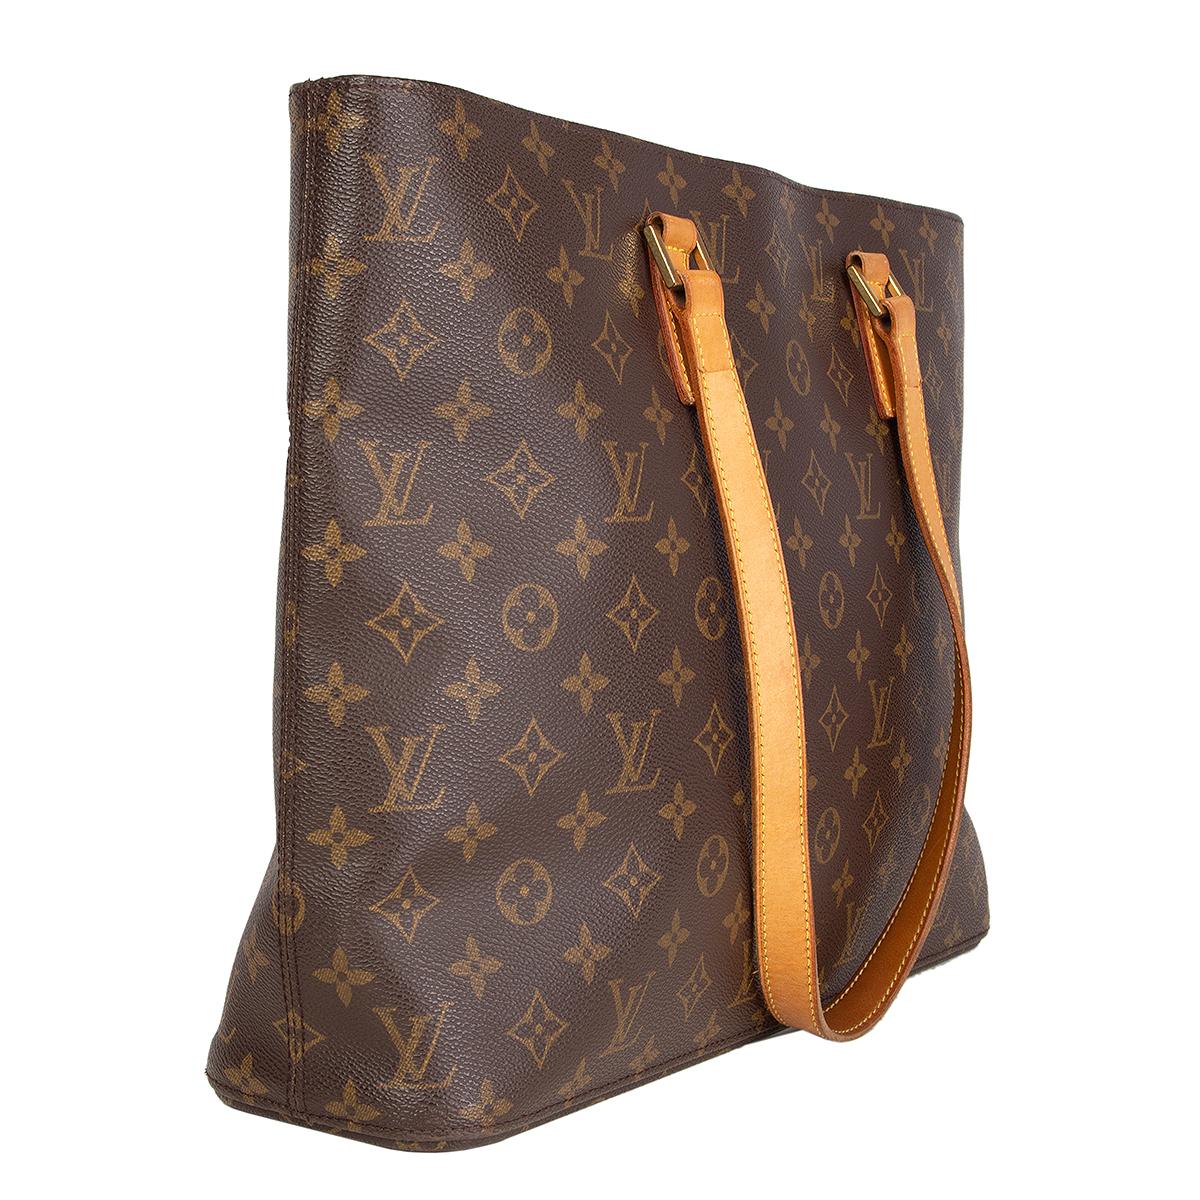 Louis Vuitton 'Luco' tote in classic brown Monogram Canvas. Opens with a zipper on top and is lined in beige microfibre with one zipper pocket against the back and threr open pockets against the front. Has been carried with patina to the leather,